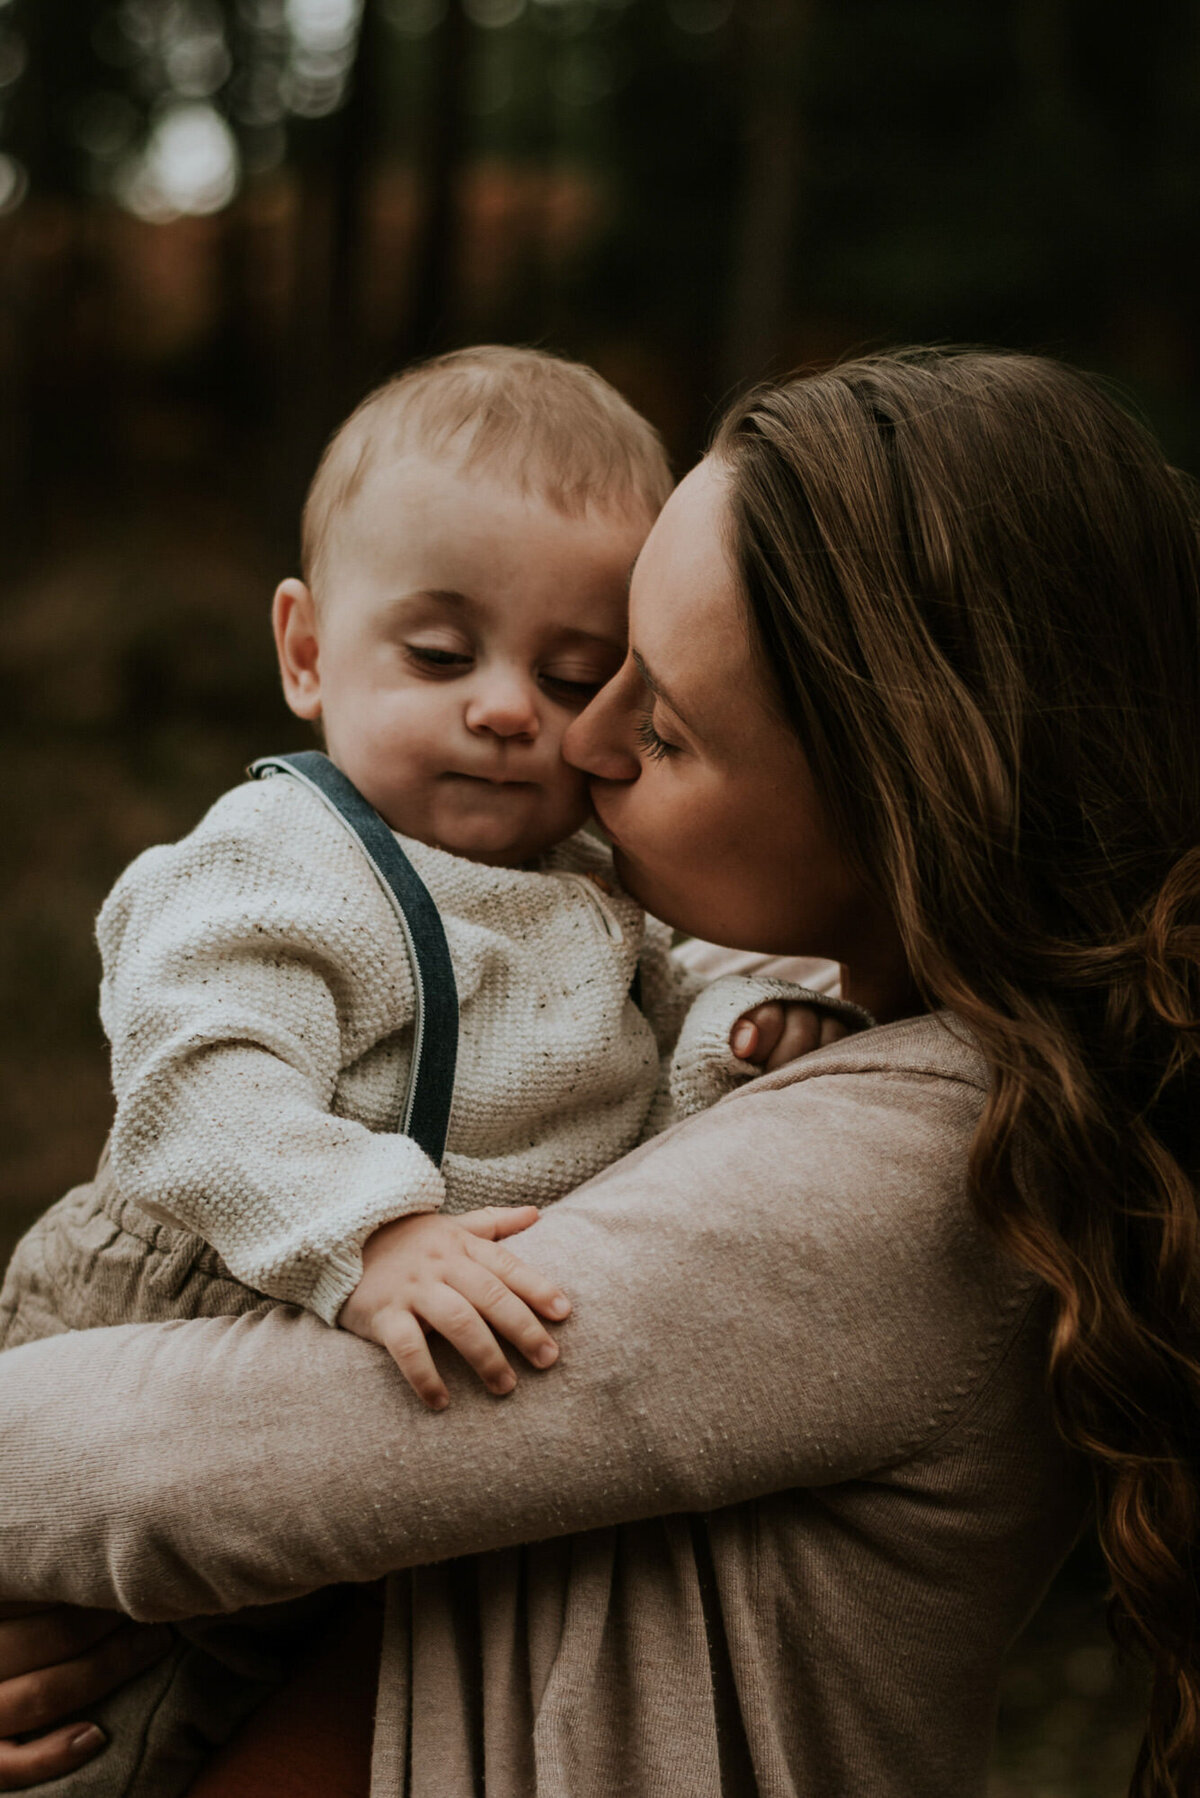 Mother kissing baby in portrait photo